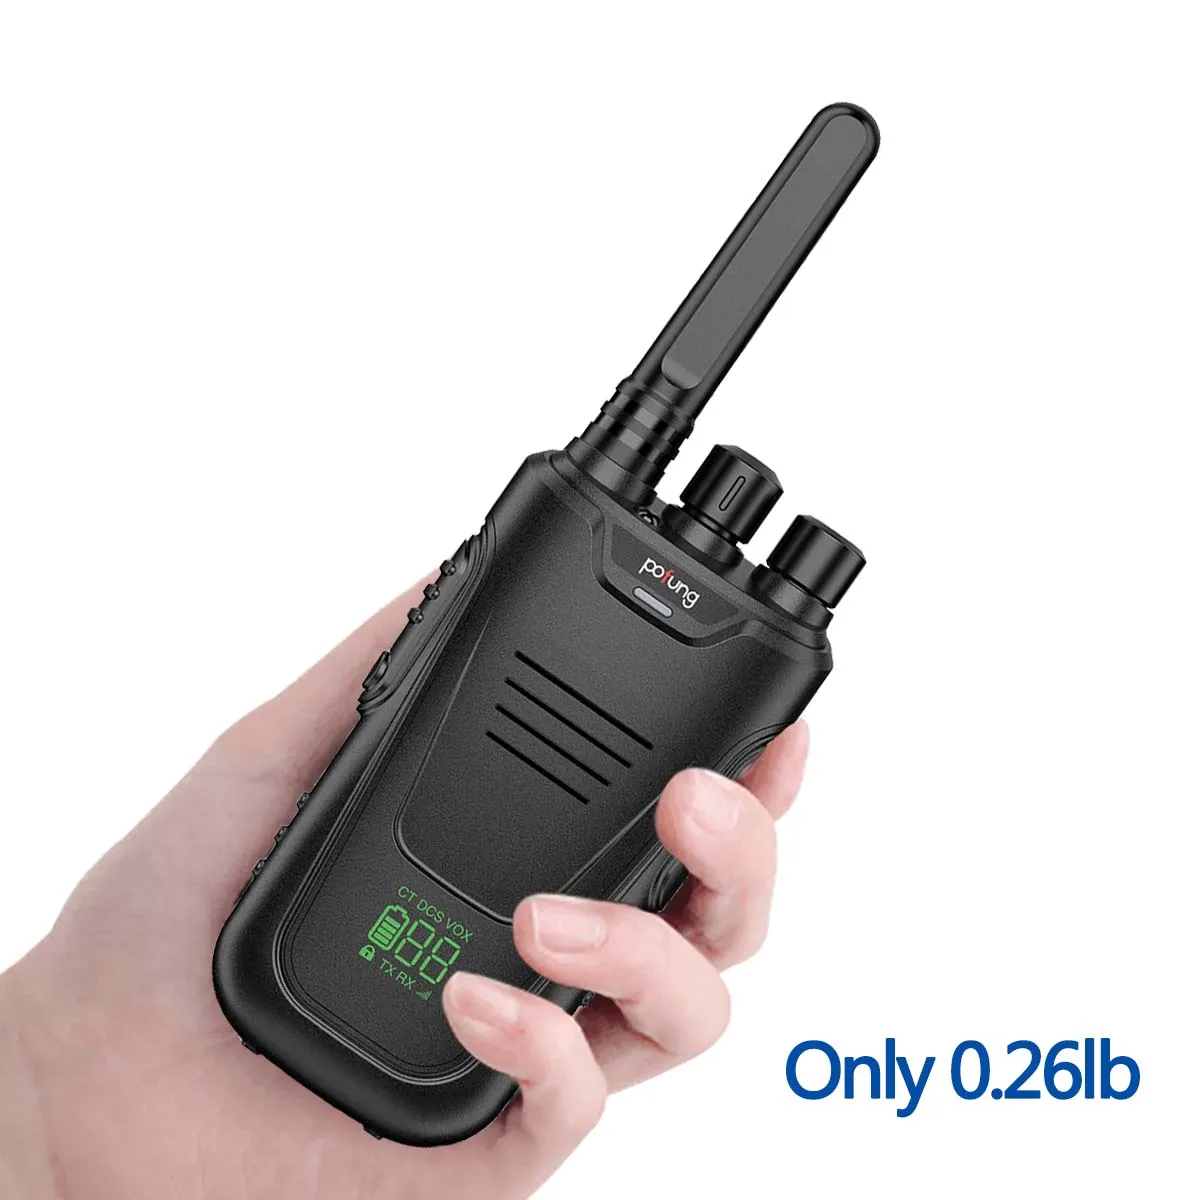 2PCS Baofeng BF-T11 Pofung Walkie Talkie Portable FRS License Free Ham Two Way Radios462-467MHz Mini Small USB Charger For Adult